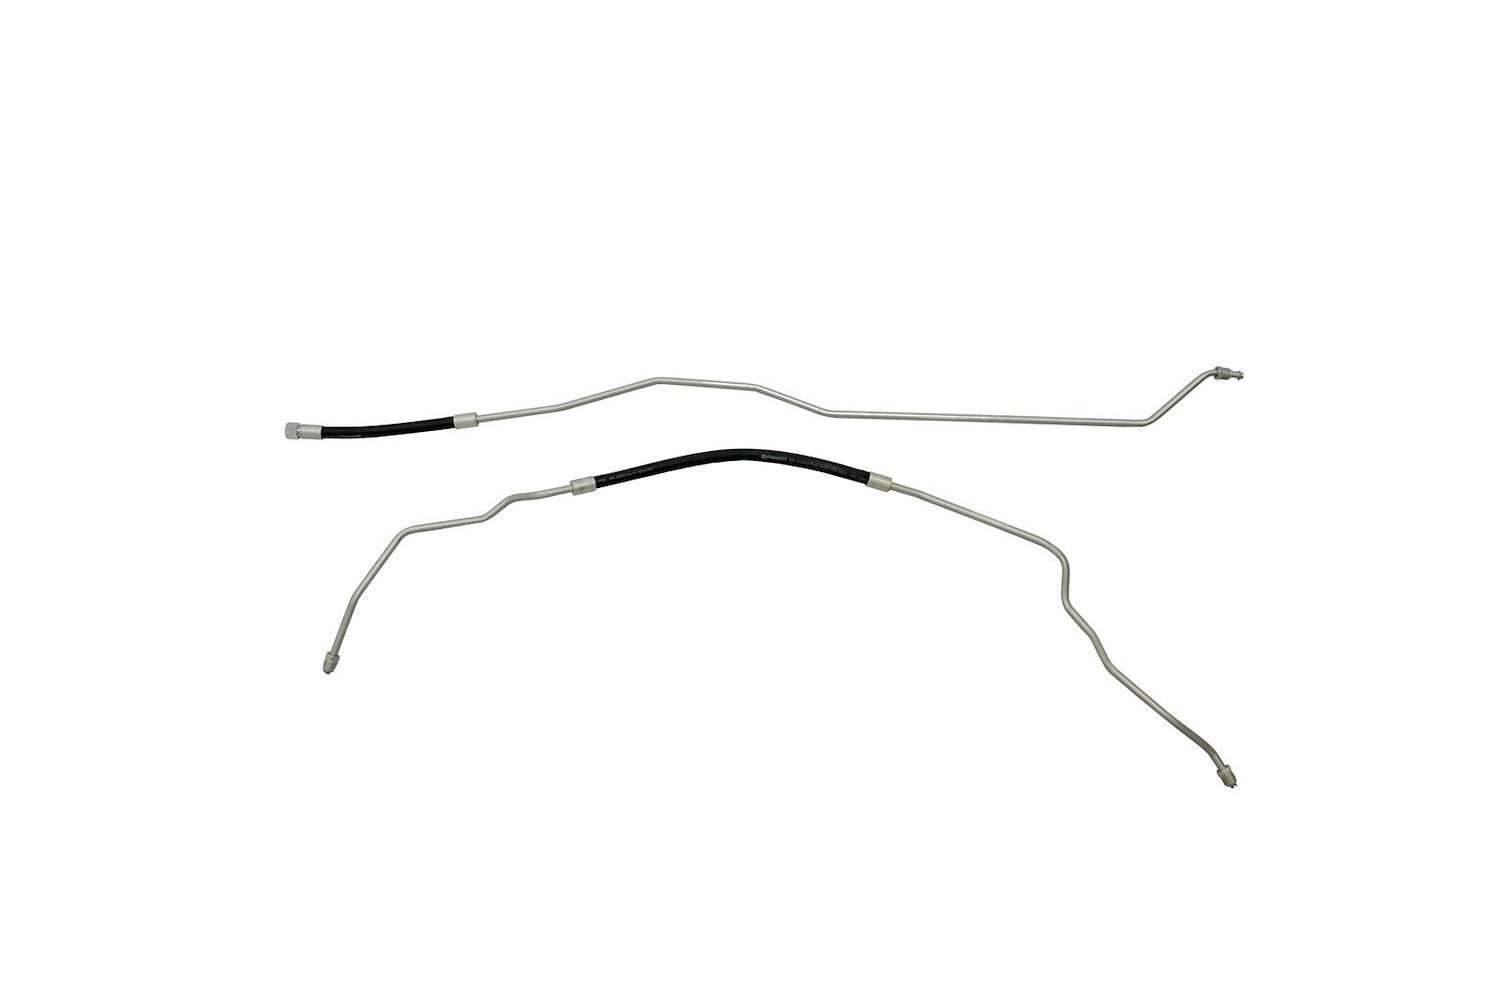 Chevy / GMC Pick Up Fuel Supply Line -1992 1993 1994